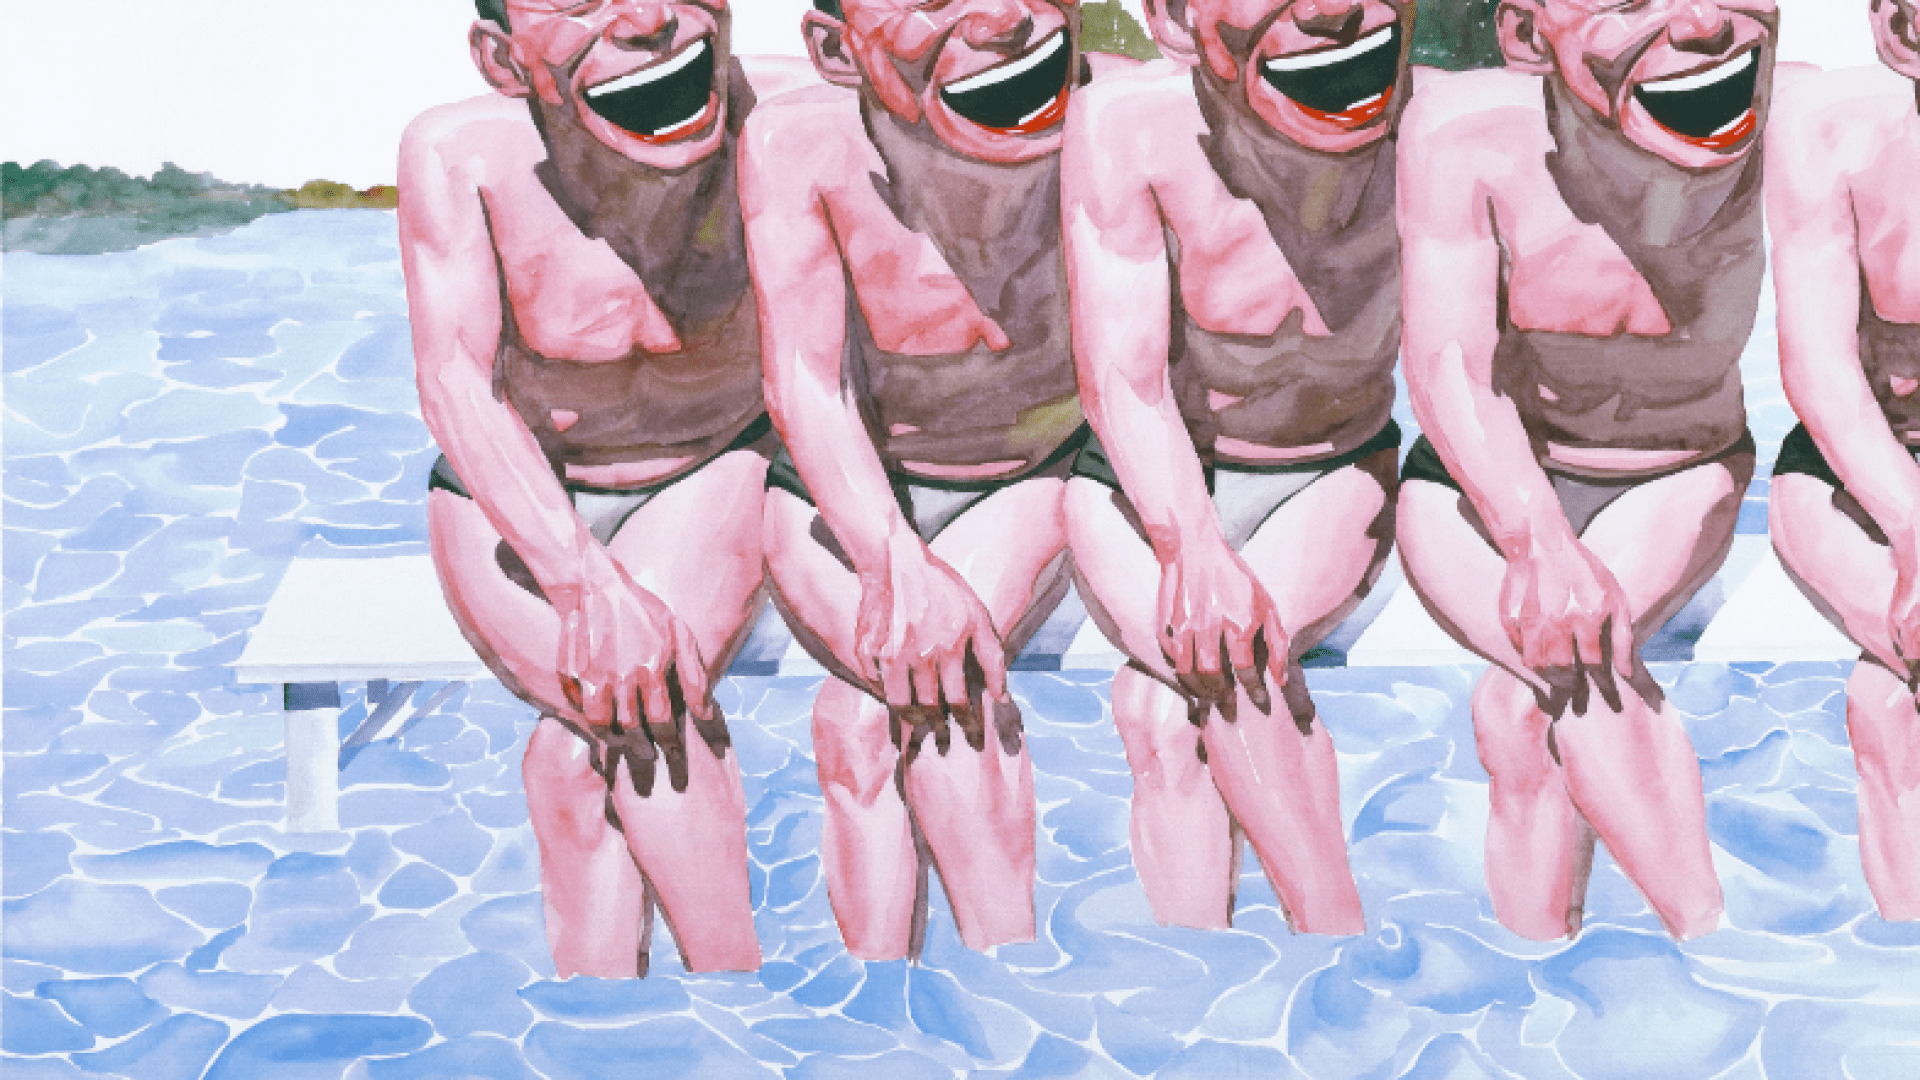 Image of four laughing Chinese men on a diving board.